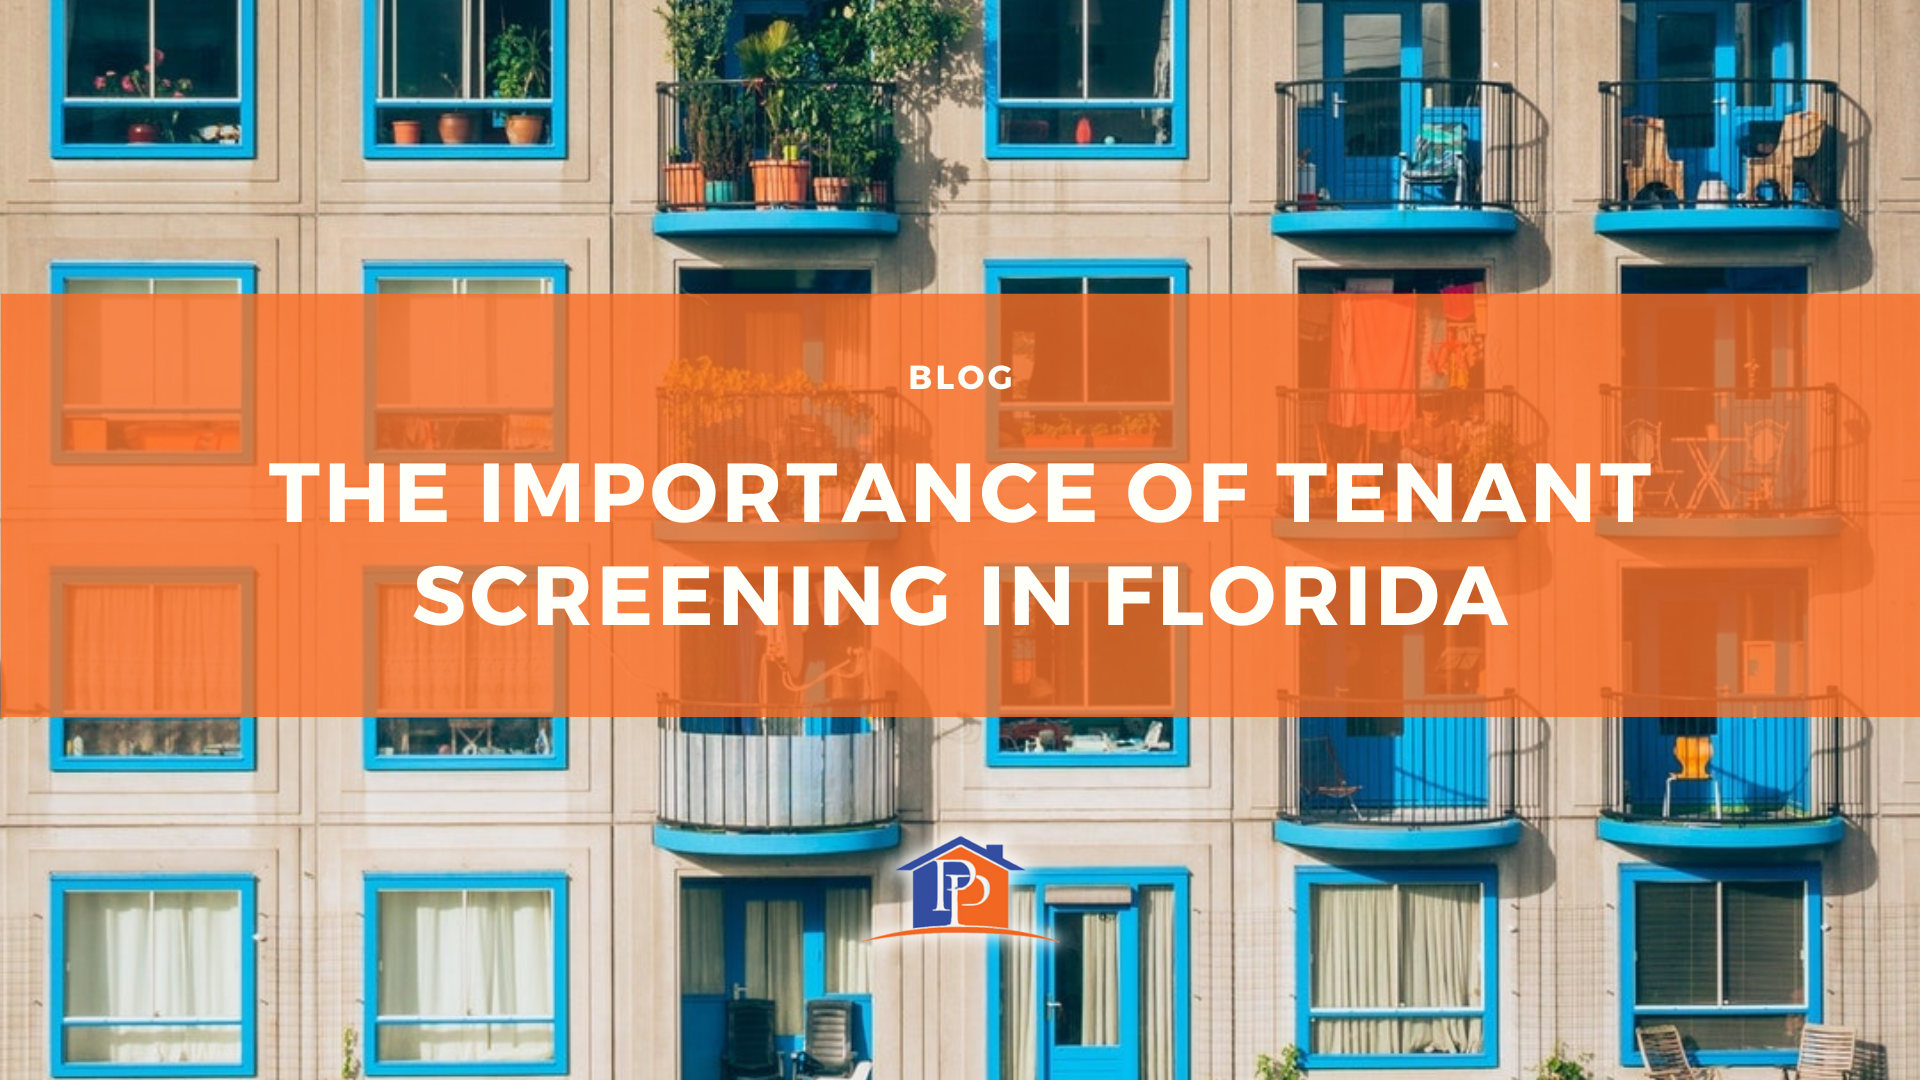 The Importance of Tenant Screening in Florida